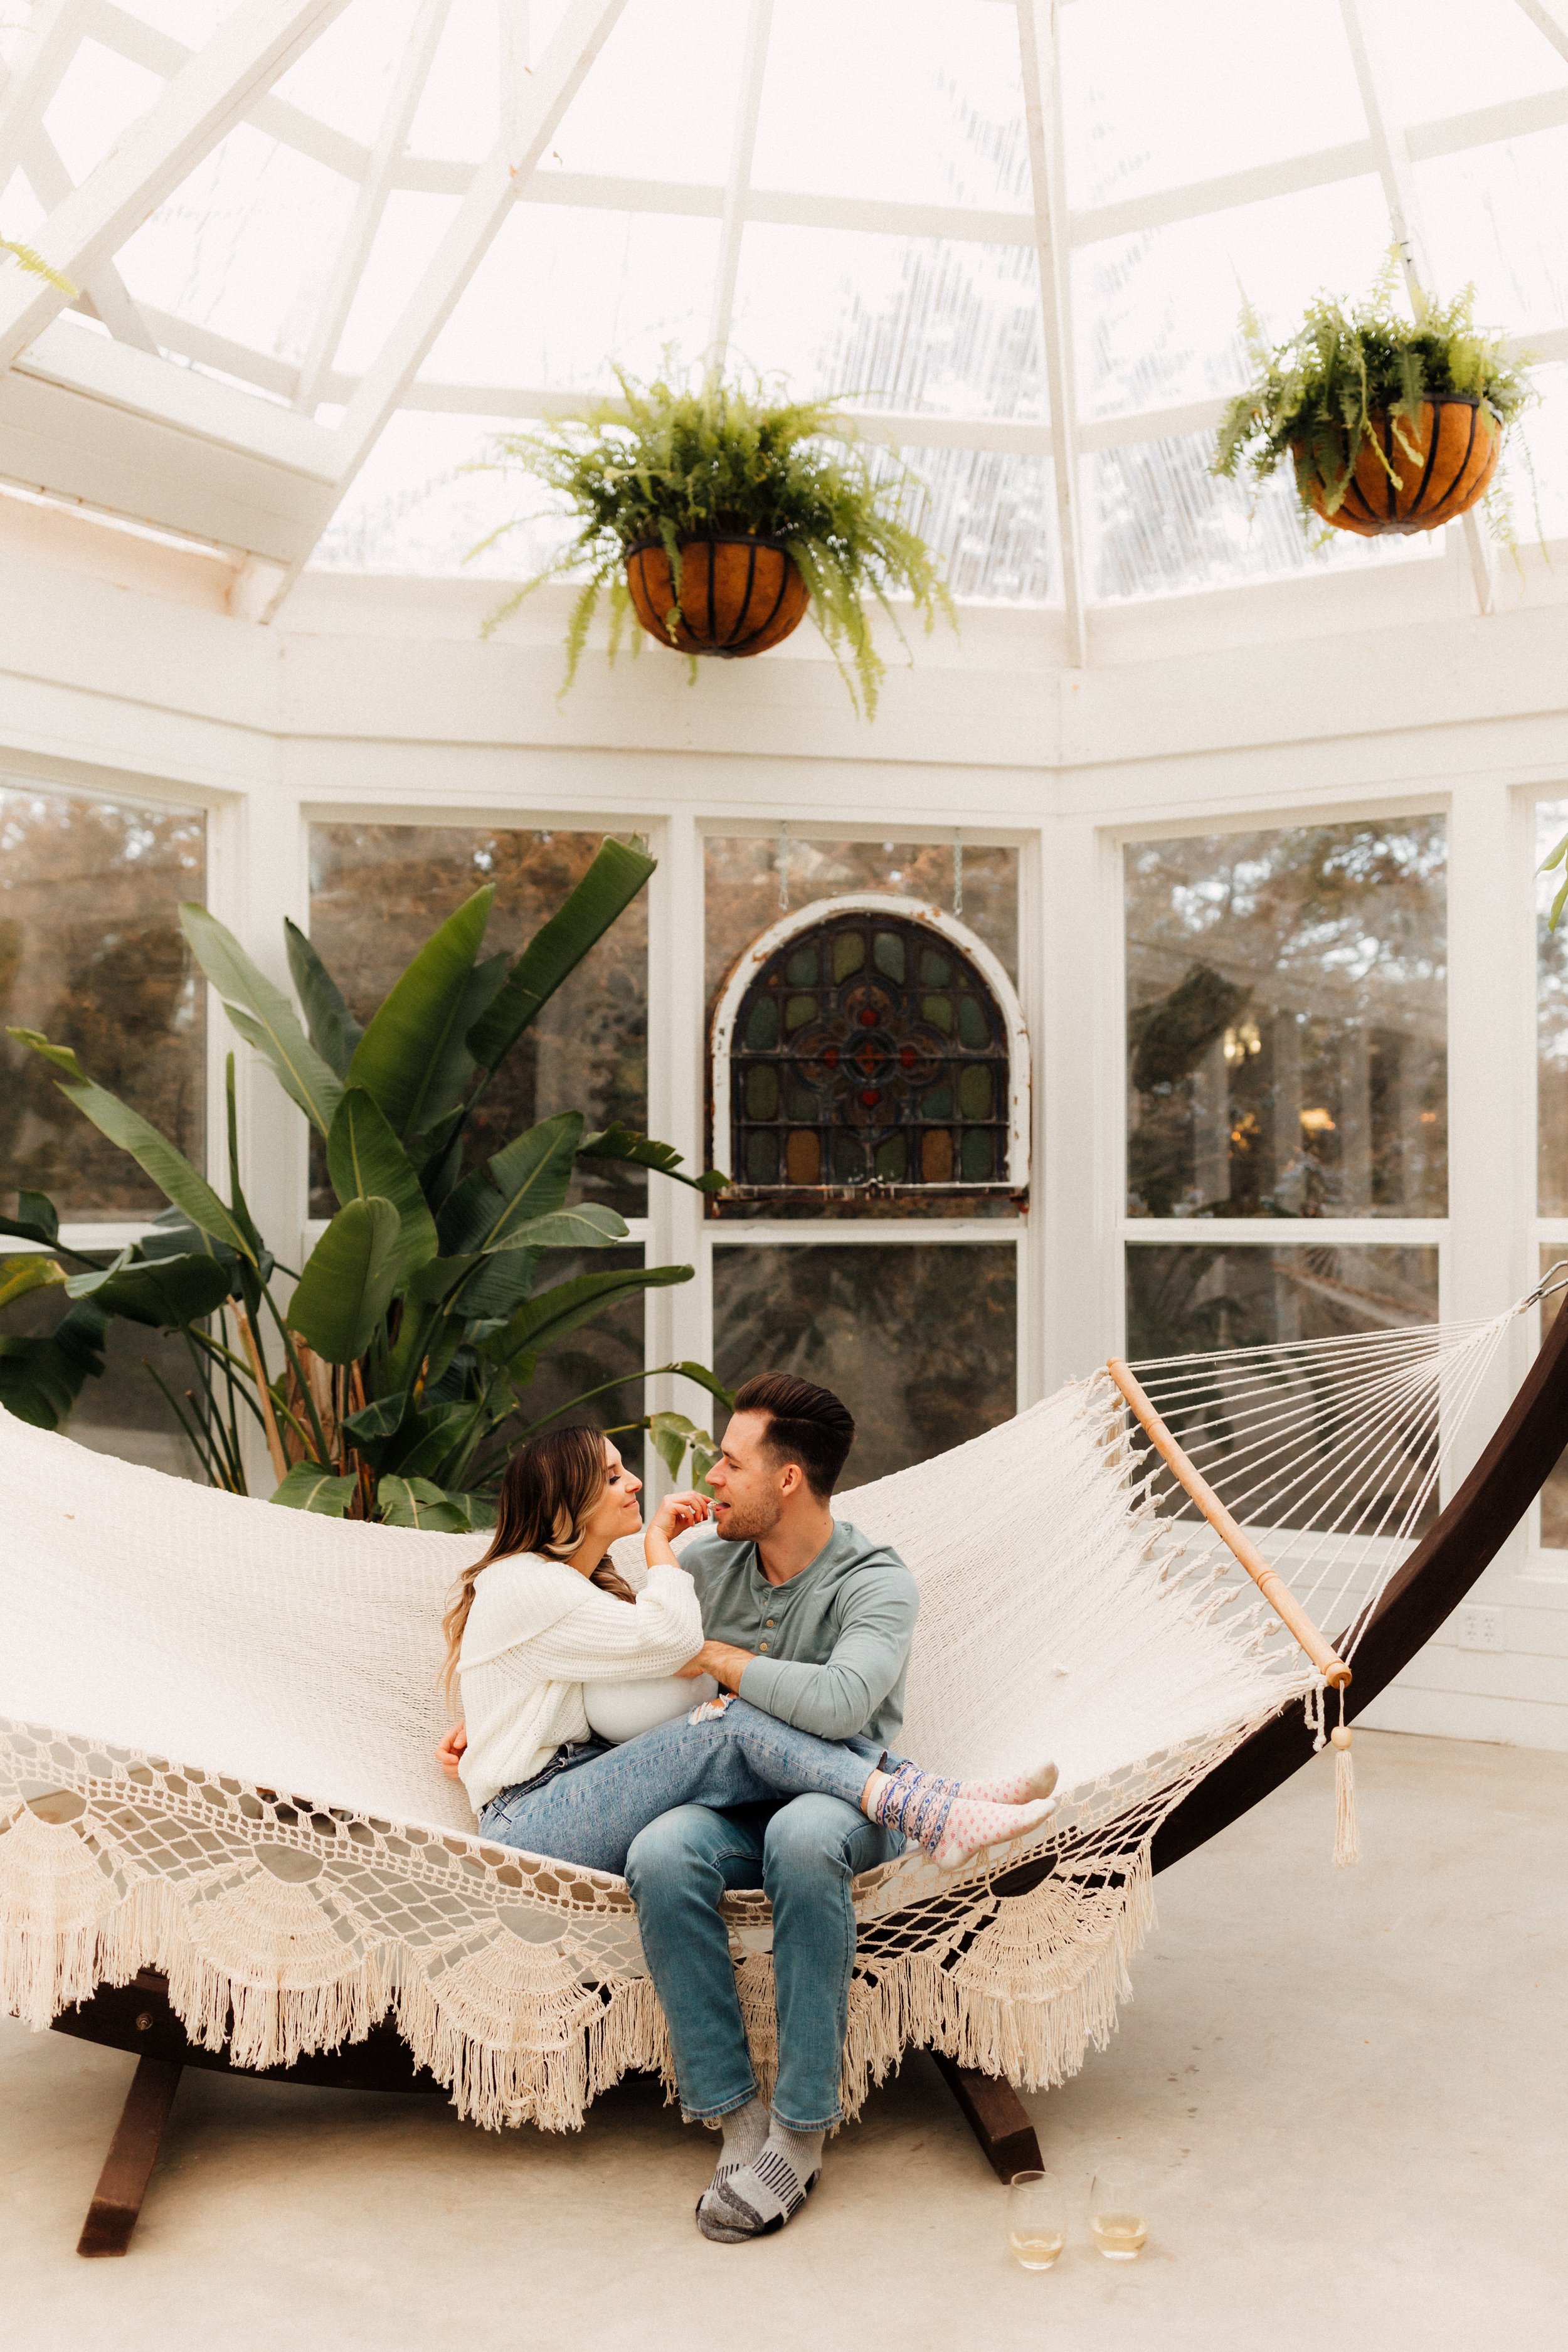 Laura_Ben_Engagment_Session_Winterset_Des_moines_Iowa_Couples_Photographer_Iris_Aisle_Cabin_Conservatory_Candid_Snow_Day_Winter_KMP_Photography-0980.jpg